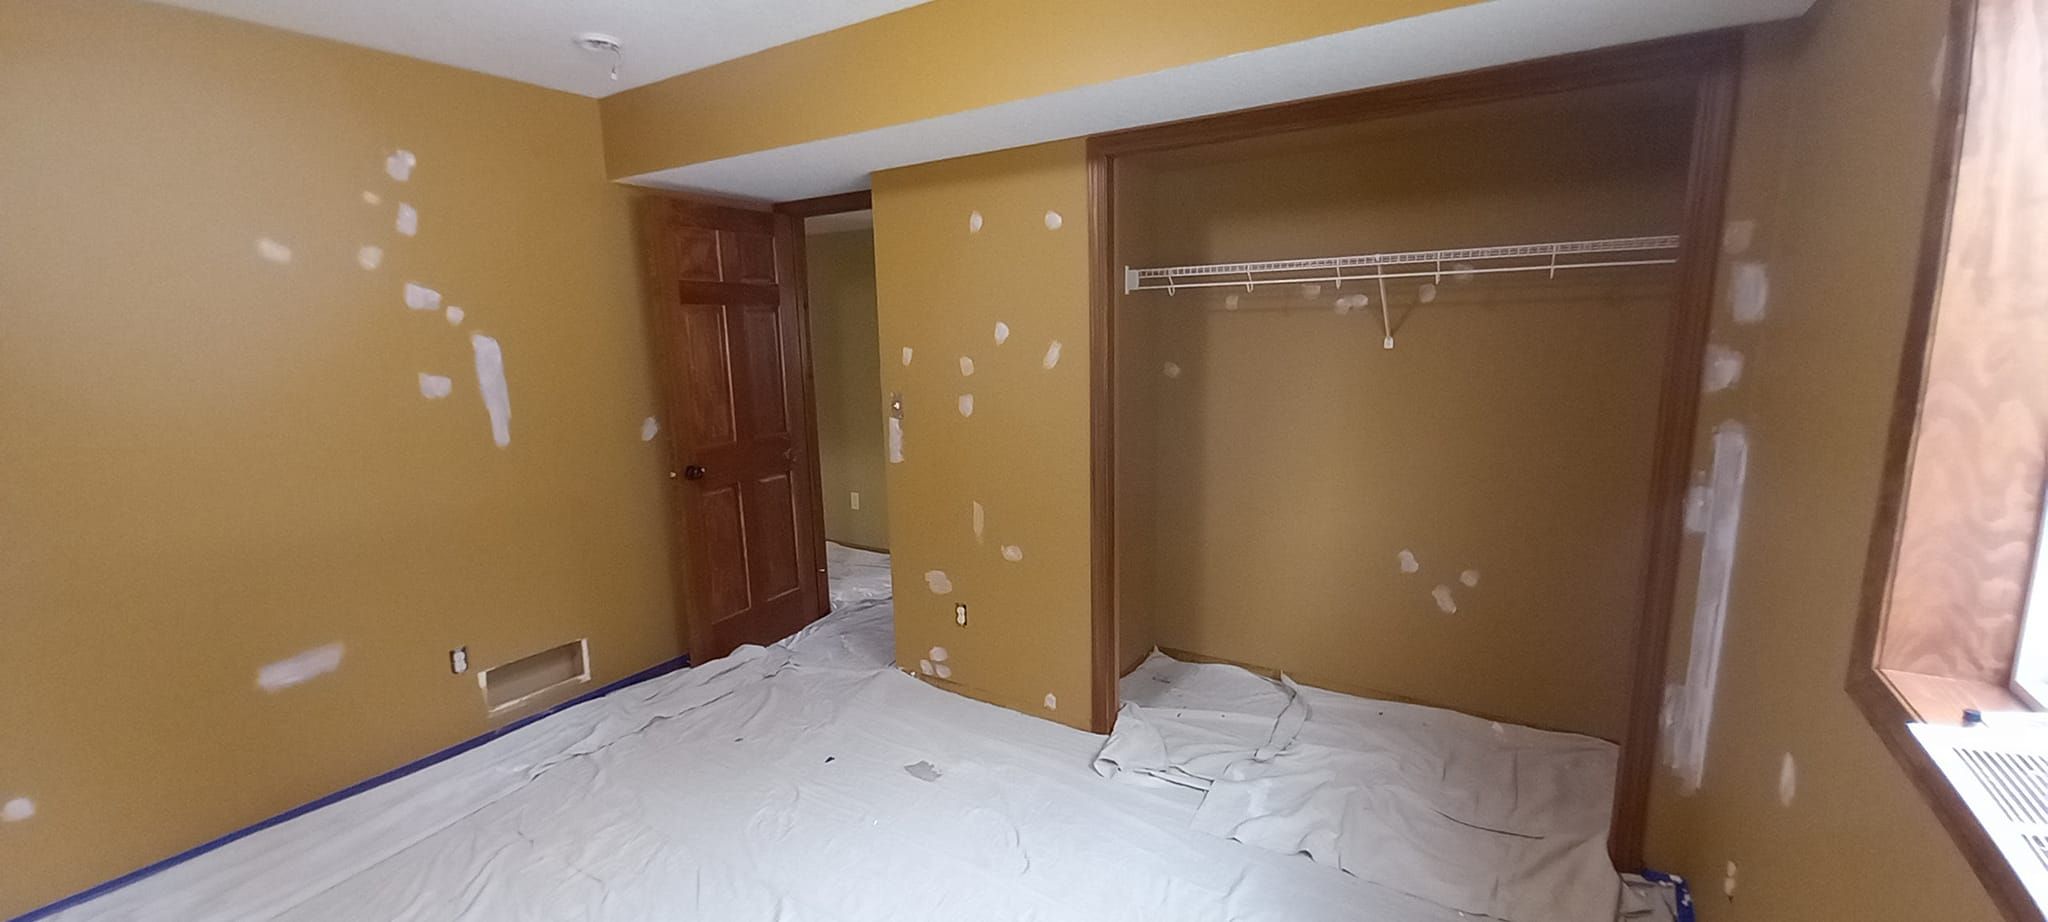 Our Past Work for M&M's Painting and Drywall in Red Wing, Minnesotta